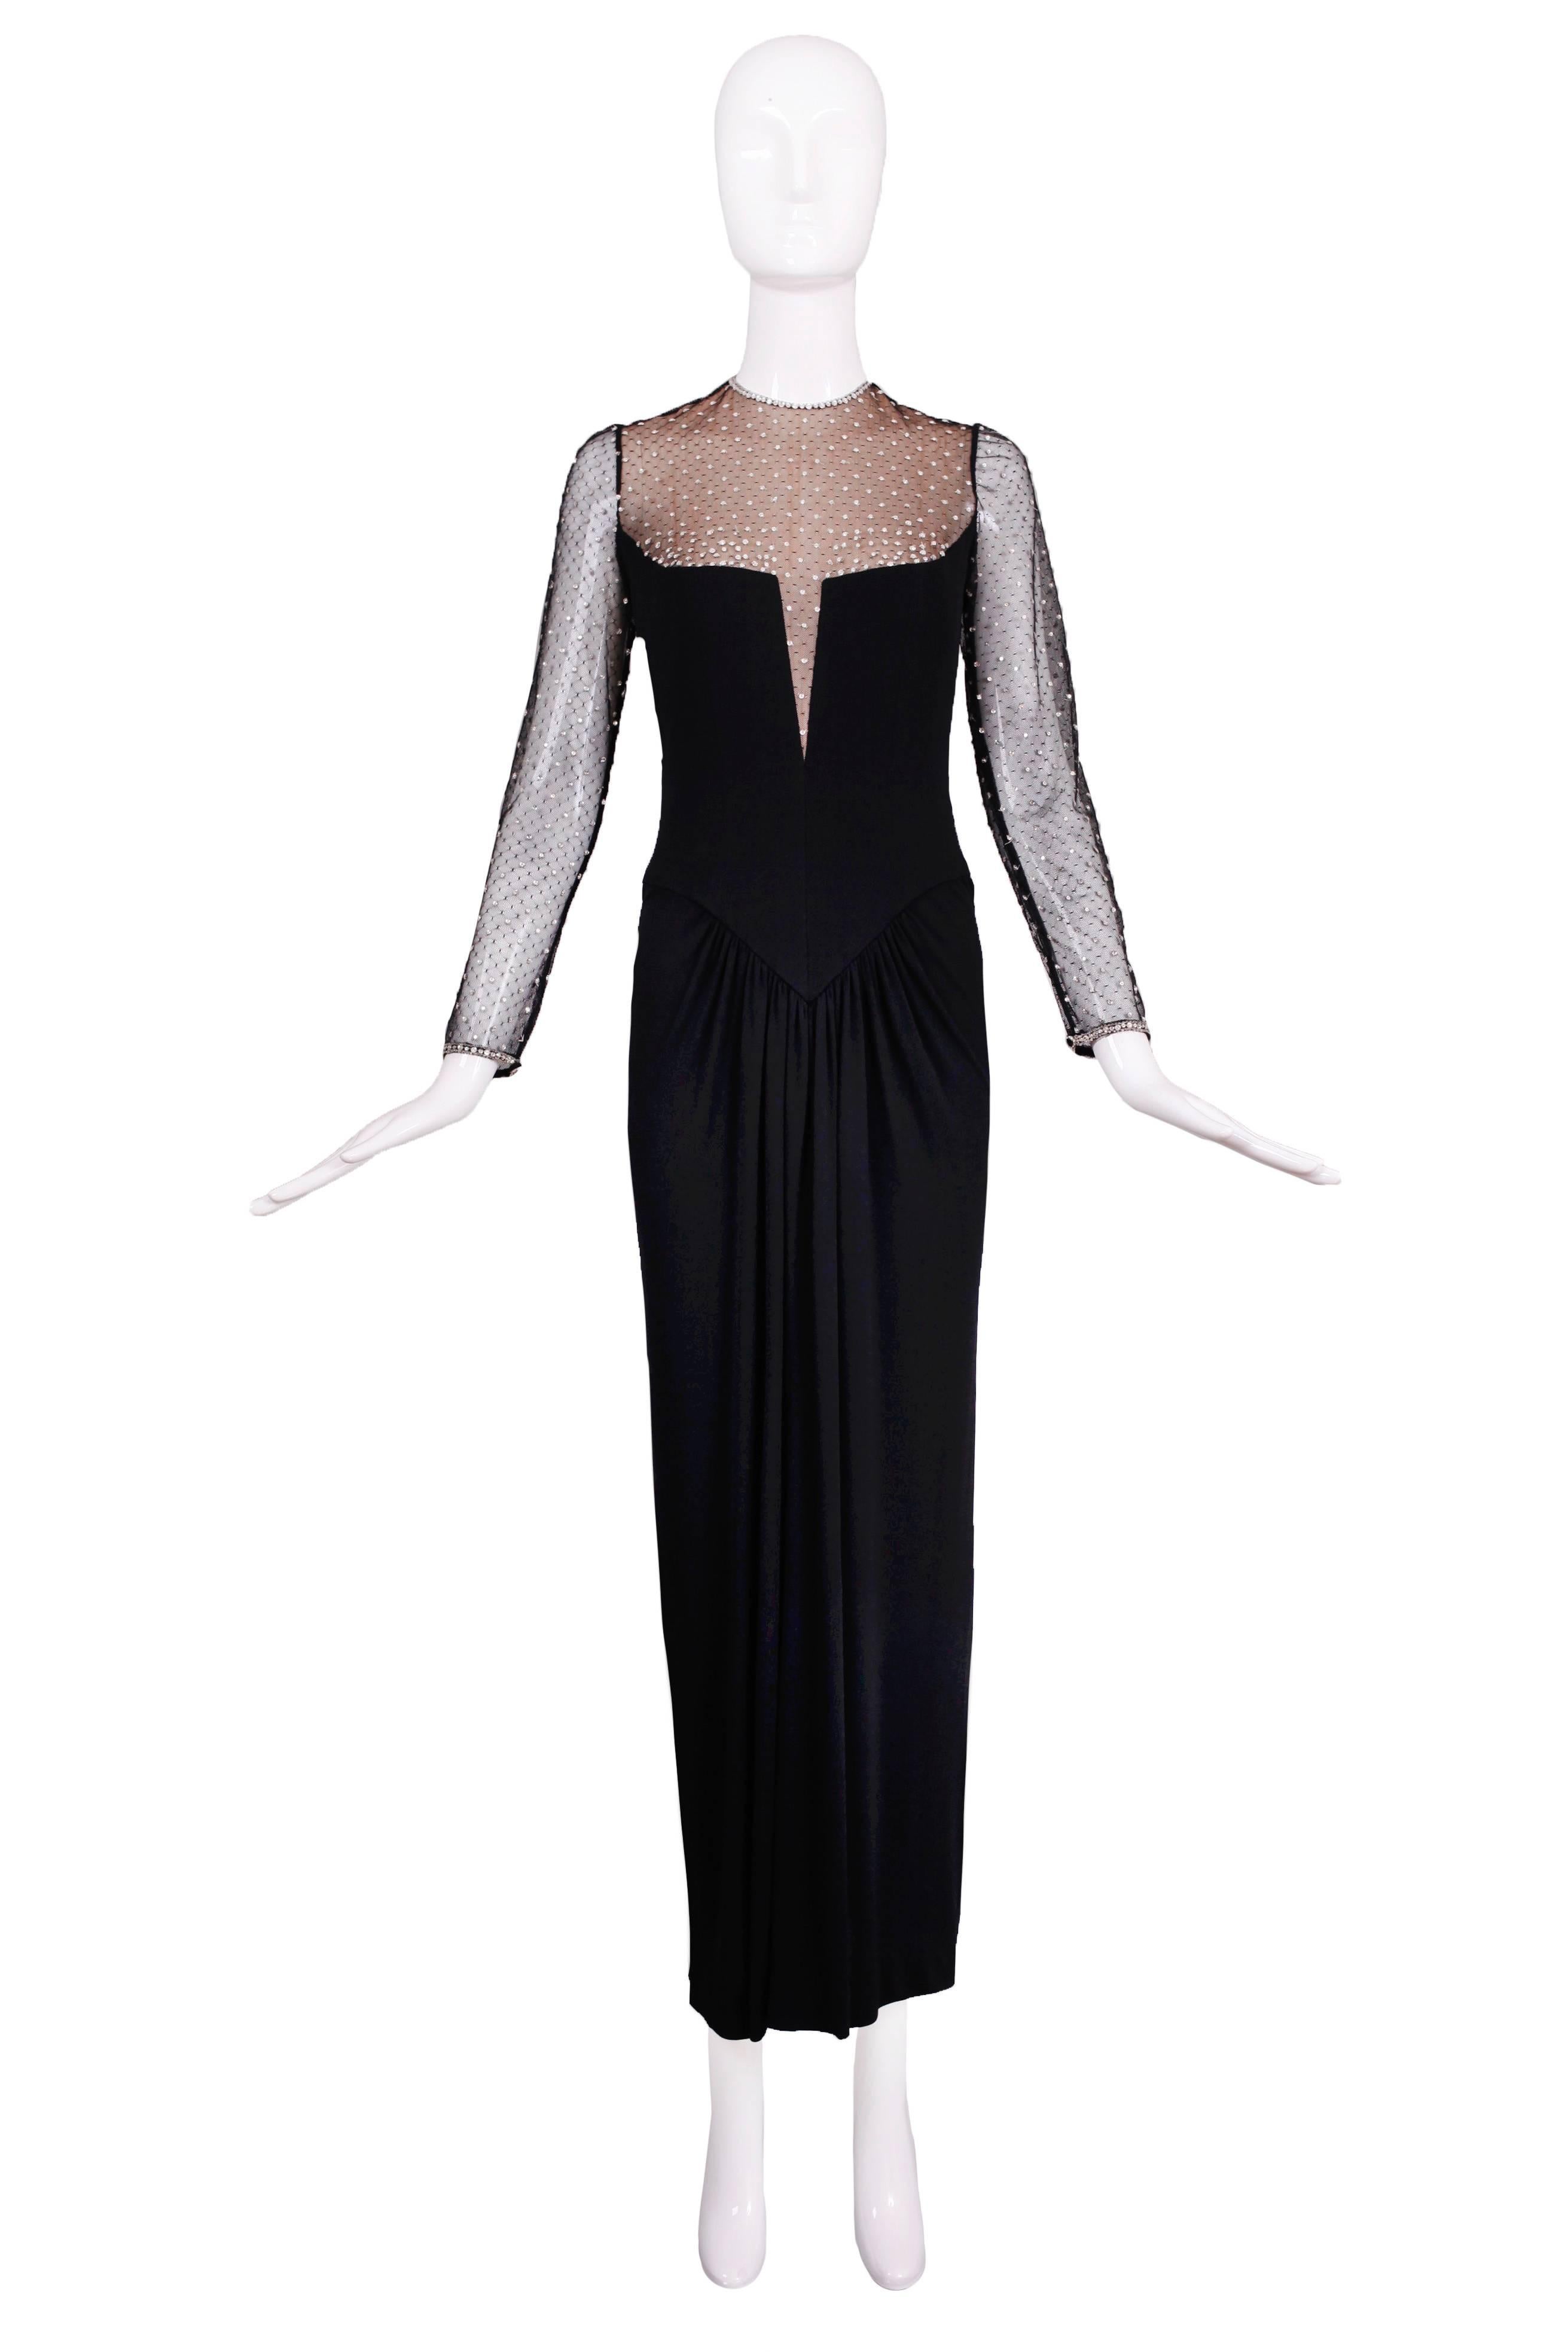 This classic 1980s Bob Mackie black illusion gown is made from silk jersey and chiffon-lined black netting with rhinestones. With its dropped waist and pleating - it is an incredibly flattering silhouette. Great little details such as rhinestone